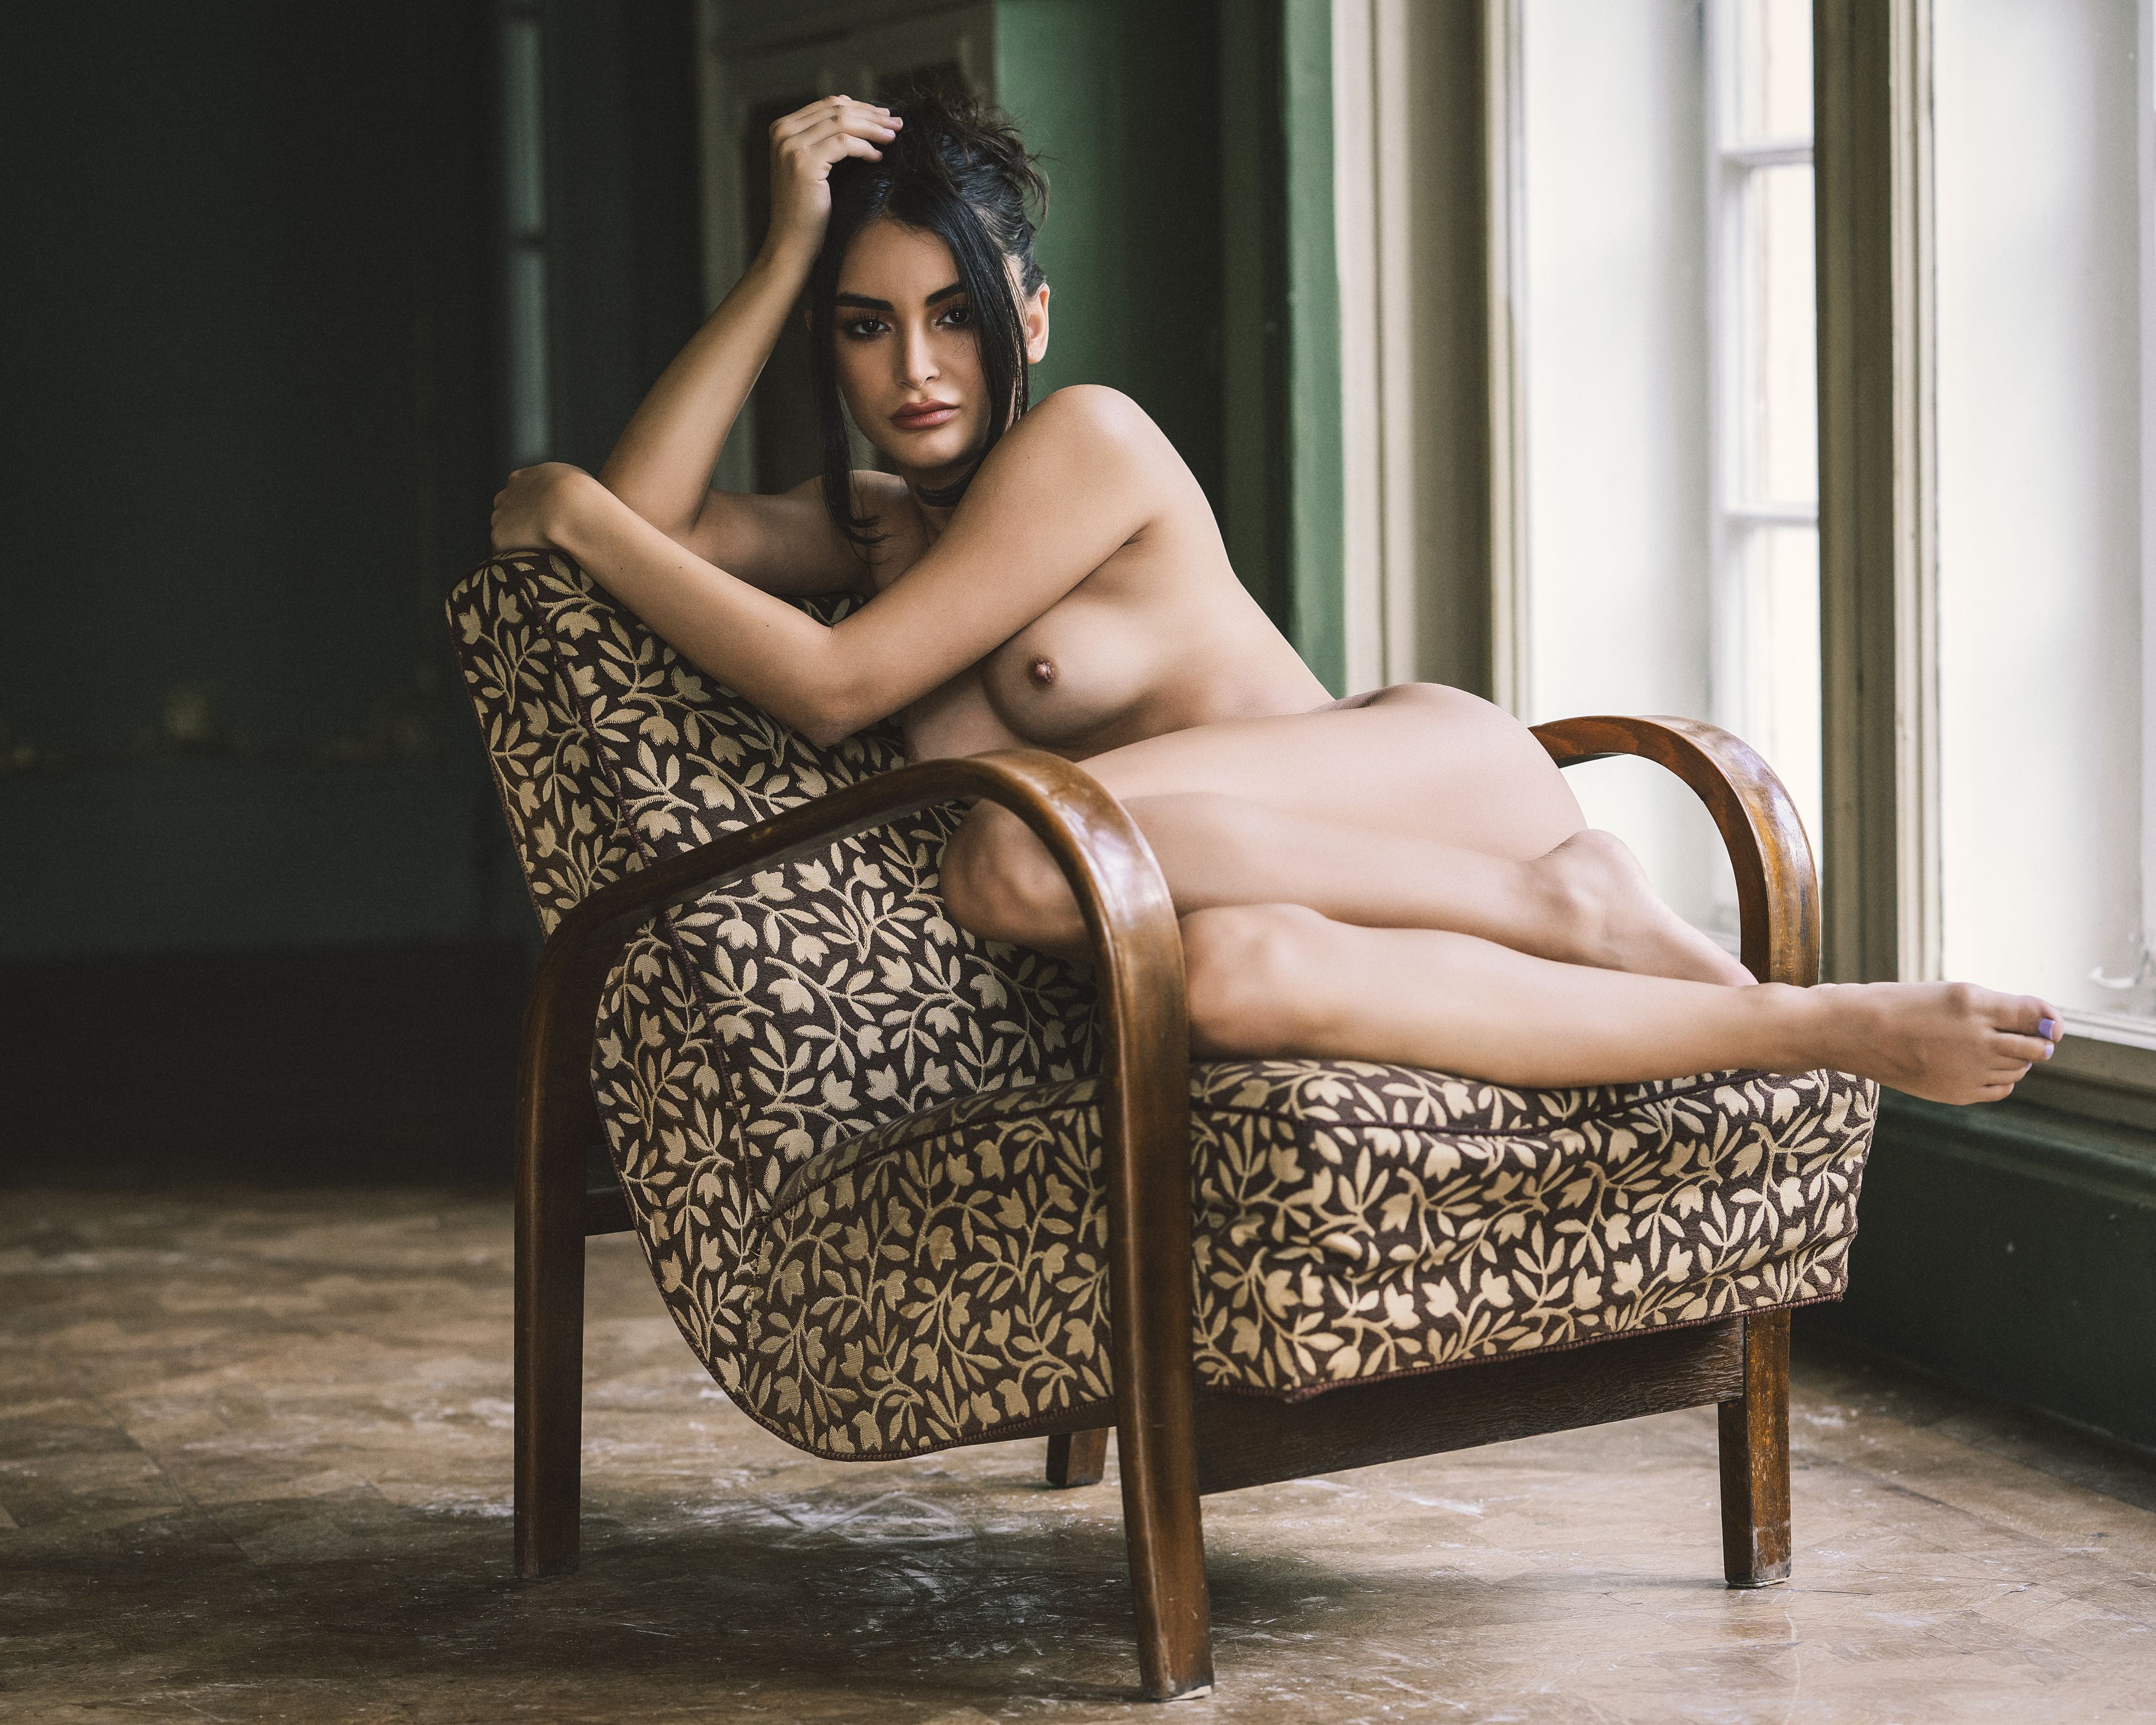 beautiful woman, beauty, chair, femininity, front view, grace, individuality, indoors, lifestyles, looking at camera, melancholy, naked, nude, one person, portrait, pose, relaxation, seductive women, sensuality, sitting, window, young women, Alex Tsarfin